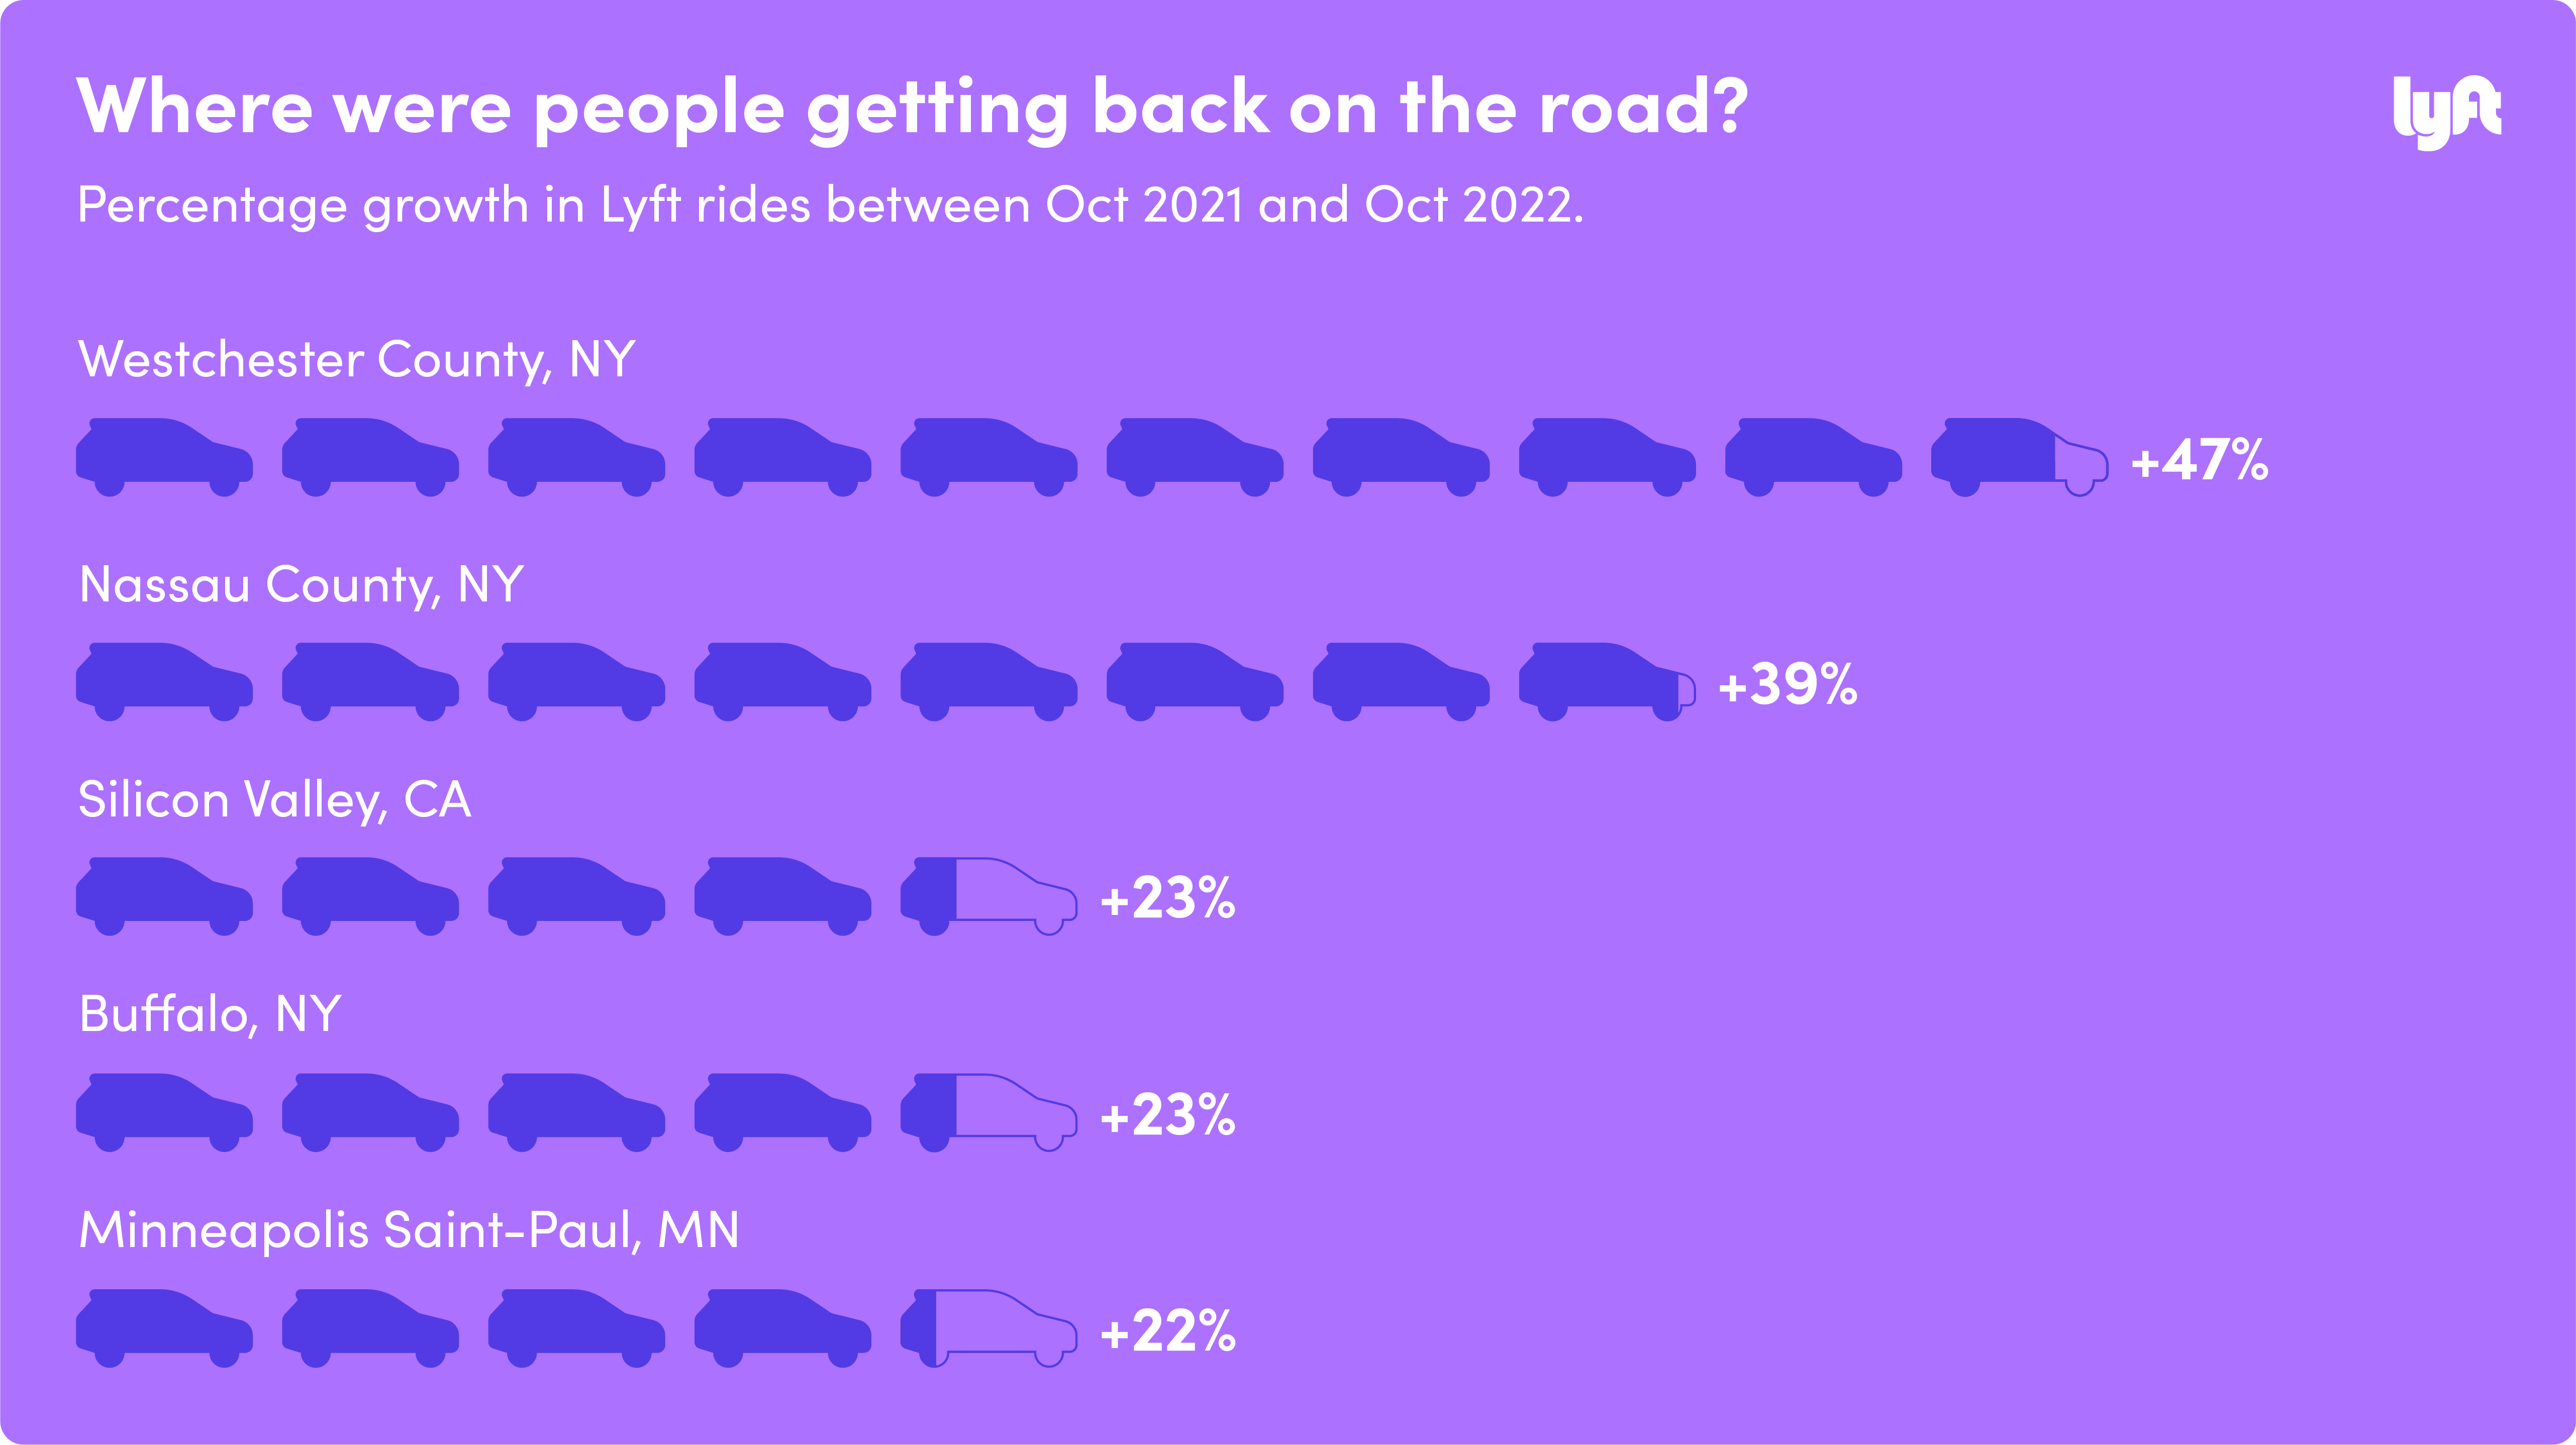 Graphical illustration of: Where were people getting back on the road? Percentage growth in Lyft rides between Oct 2021 and Oct 2022. Westchester County, NY +47%, Nassau County, NY +39%, Silicon Valley, CA +23%, Buffalo, NY +23, Minneapolis Saint-Paul, MN +22%